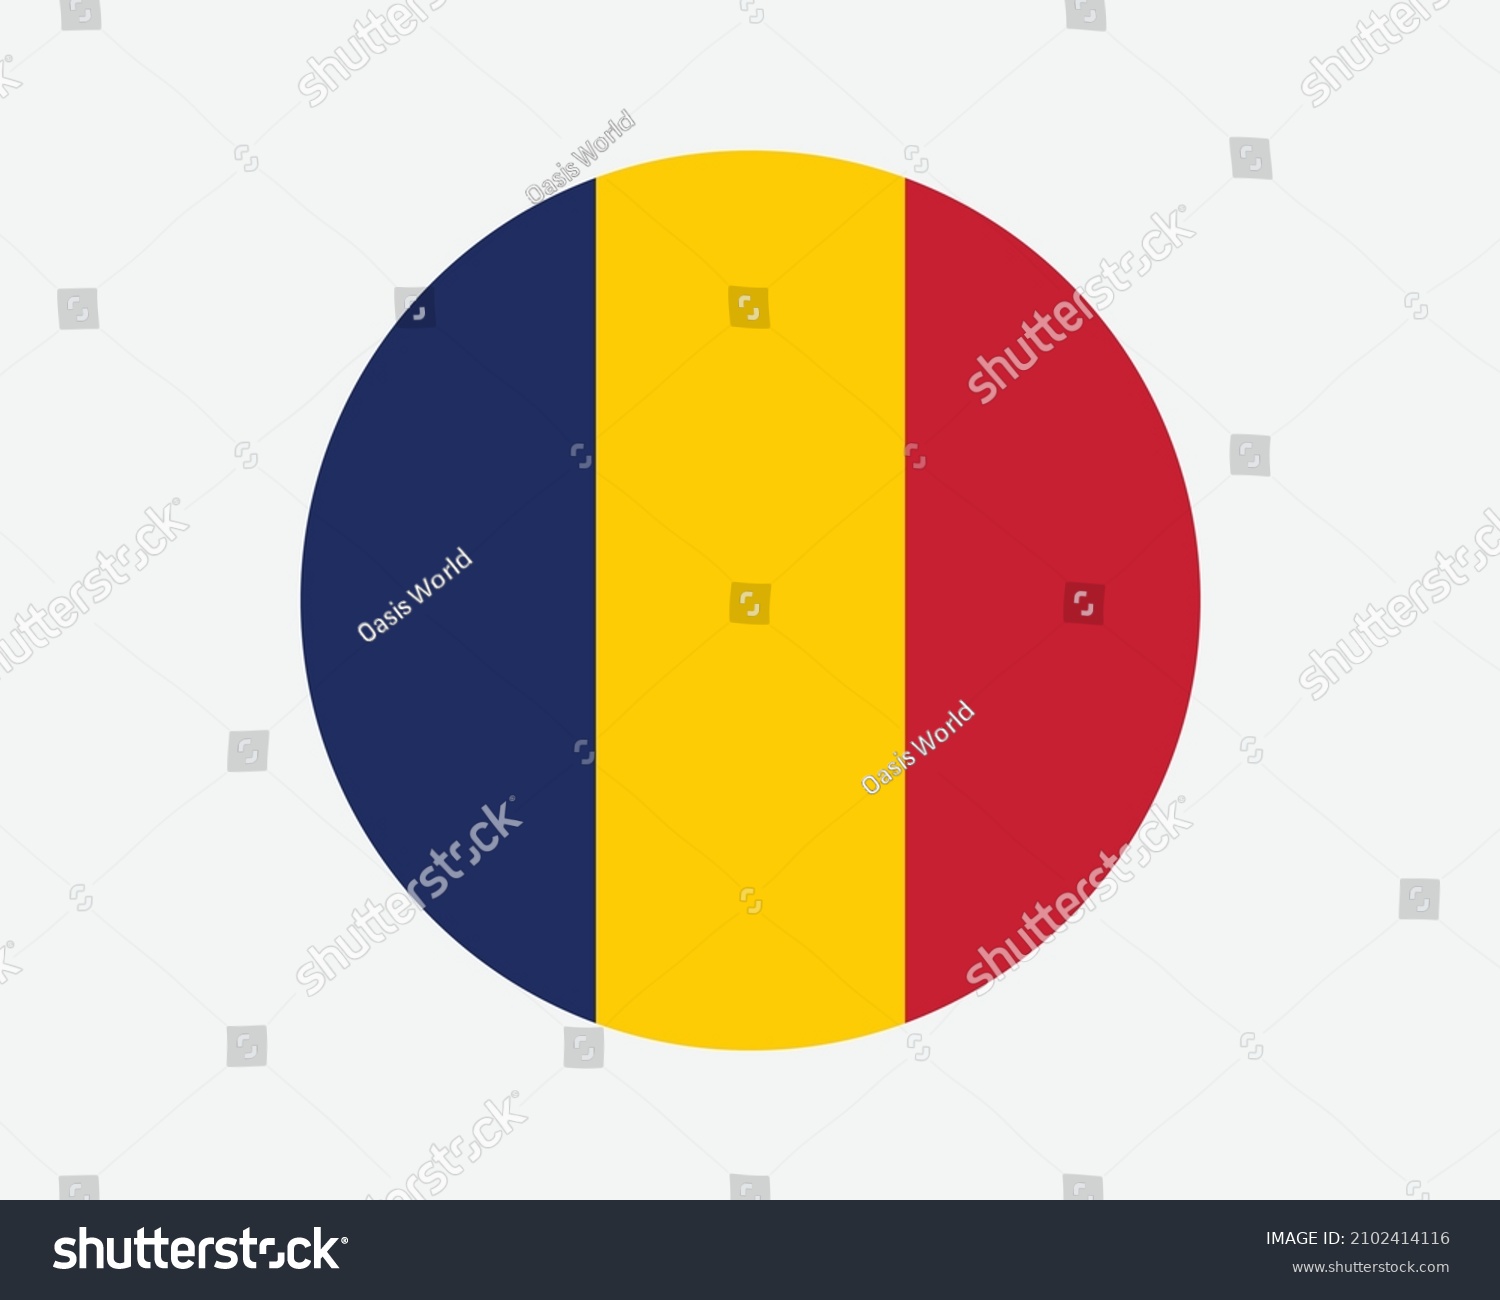 SVG of Chad Round Country Flag. Circular Chadian National Flag. Republic of Chad Circle Shape Button Banner. EPS Vector Illustration. svg